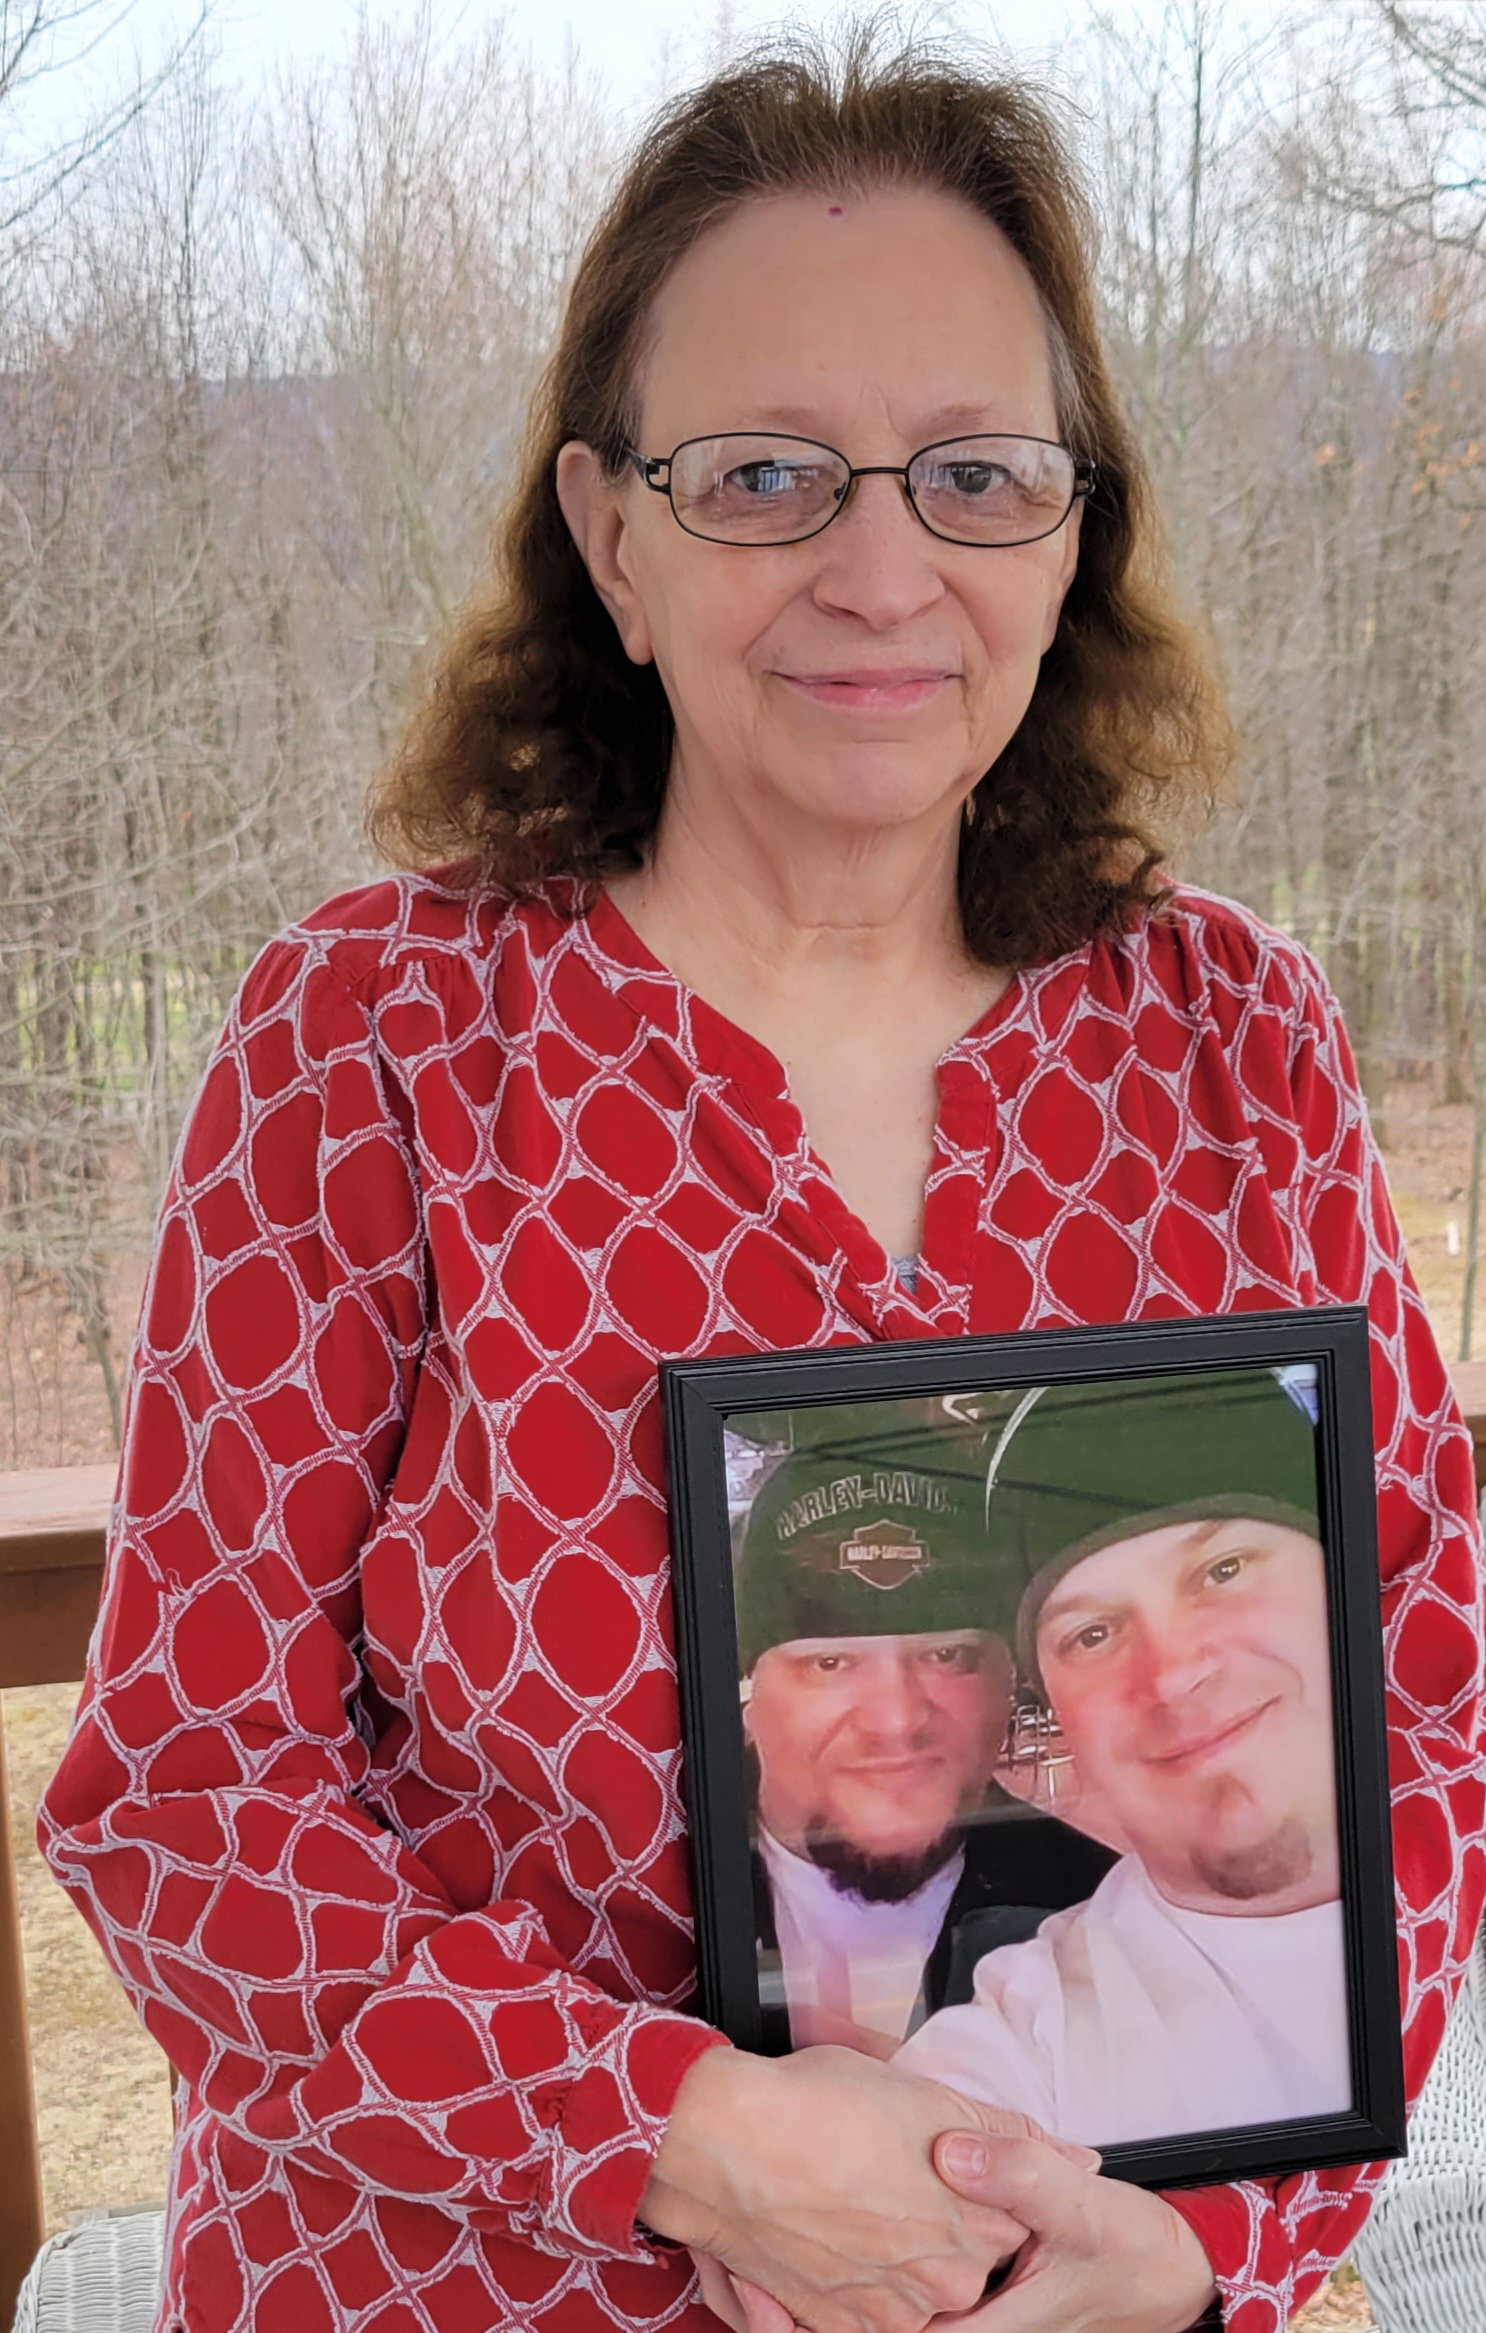 Connie Houtz is seen standing outside her home, holding a framed photo of her sons Toby and Eric Delamarter. In the photo she's holding, the sons are standing together, smiling.